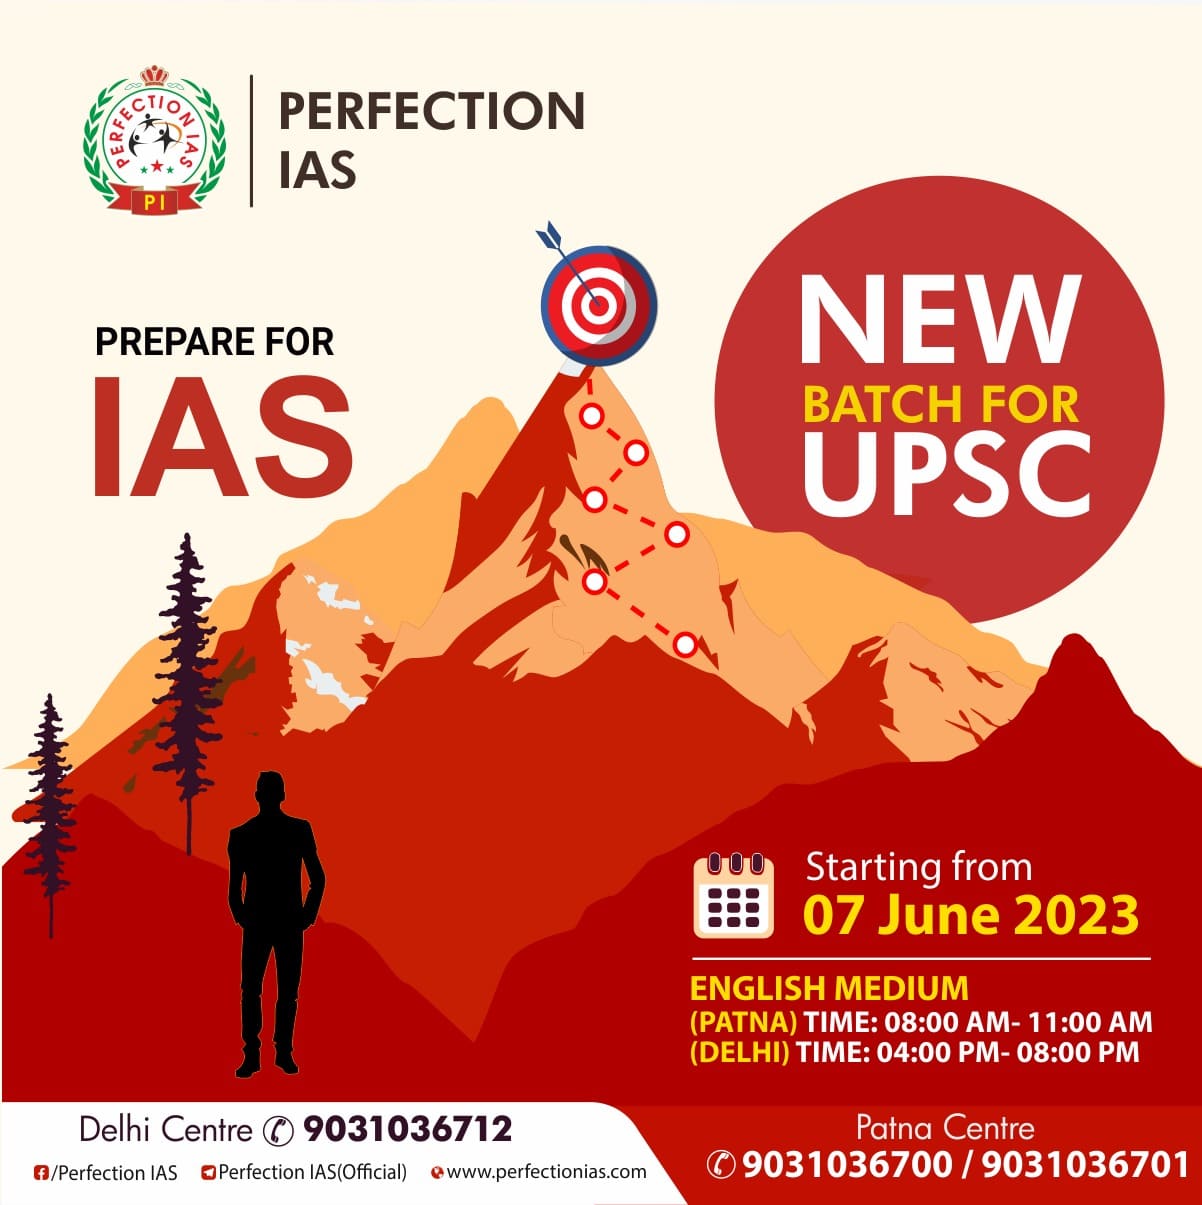 UPSC New Batch Starting from 07th June at Delhi Center.